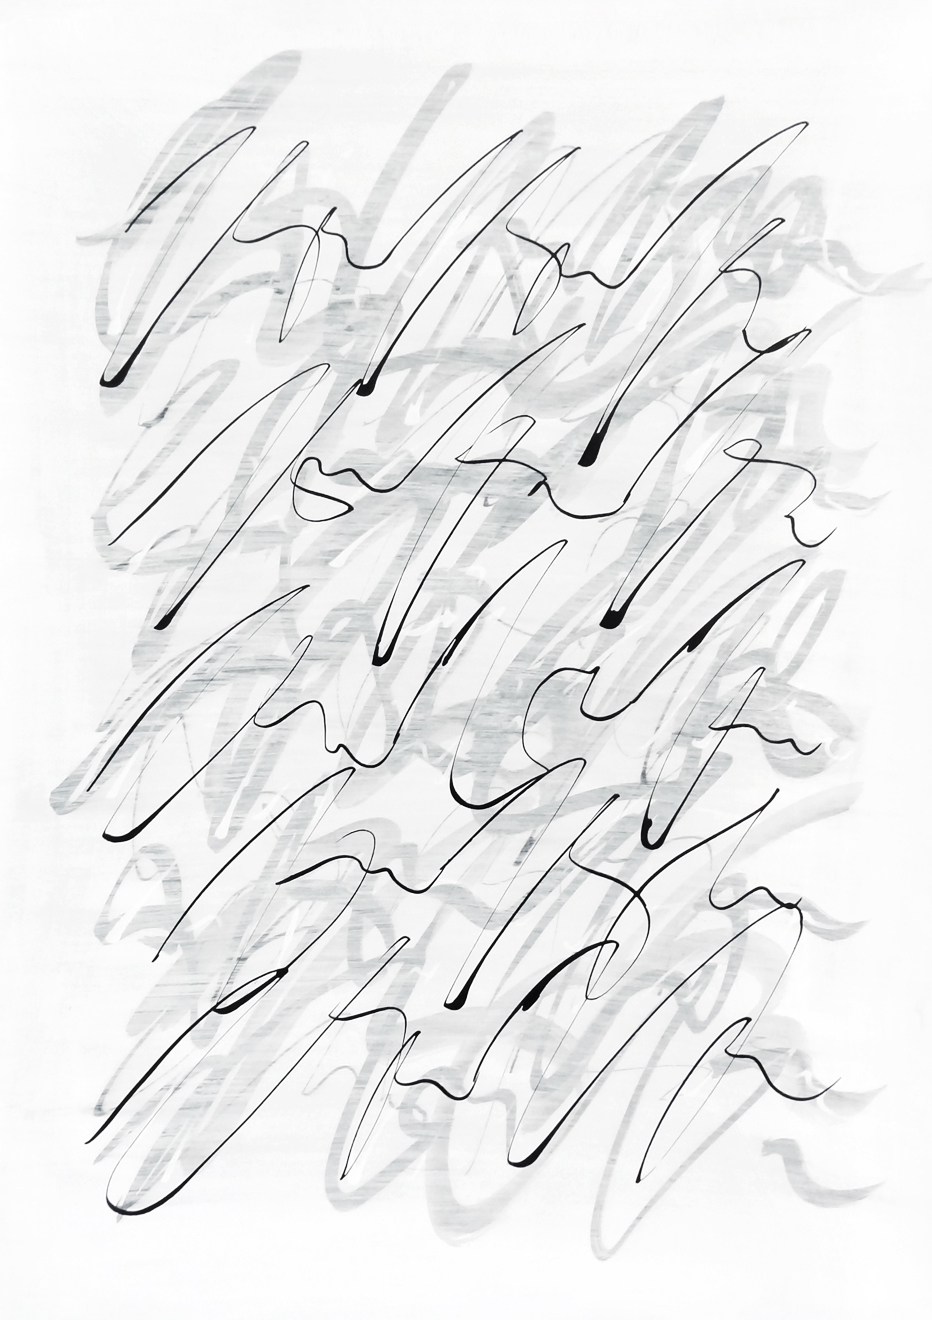  Untitled, 2019 calligraphy ink on paper 42,0 x 29,7 cm (33-19) 